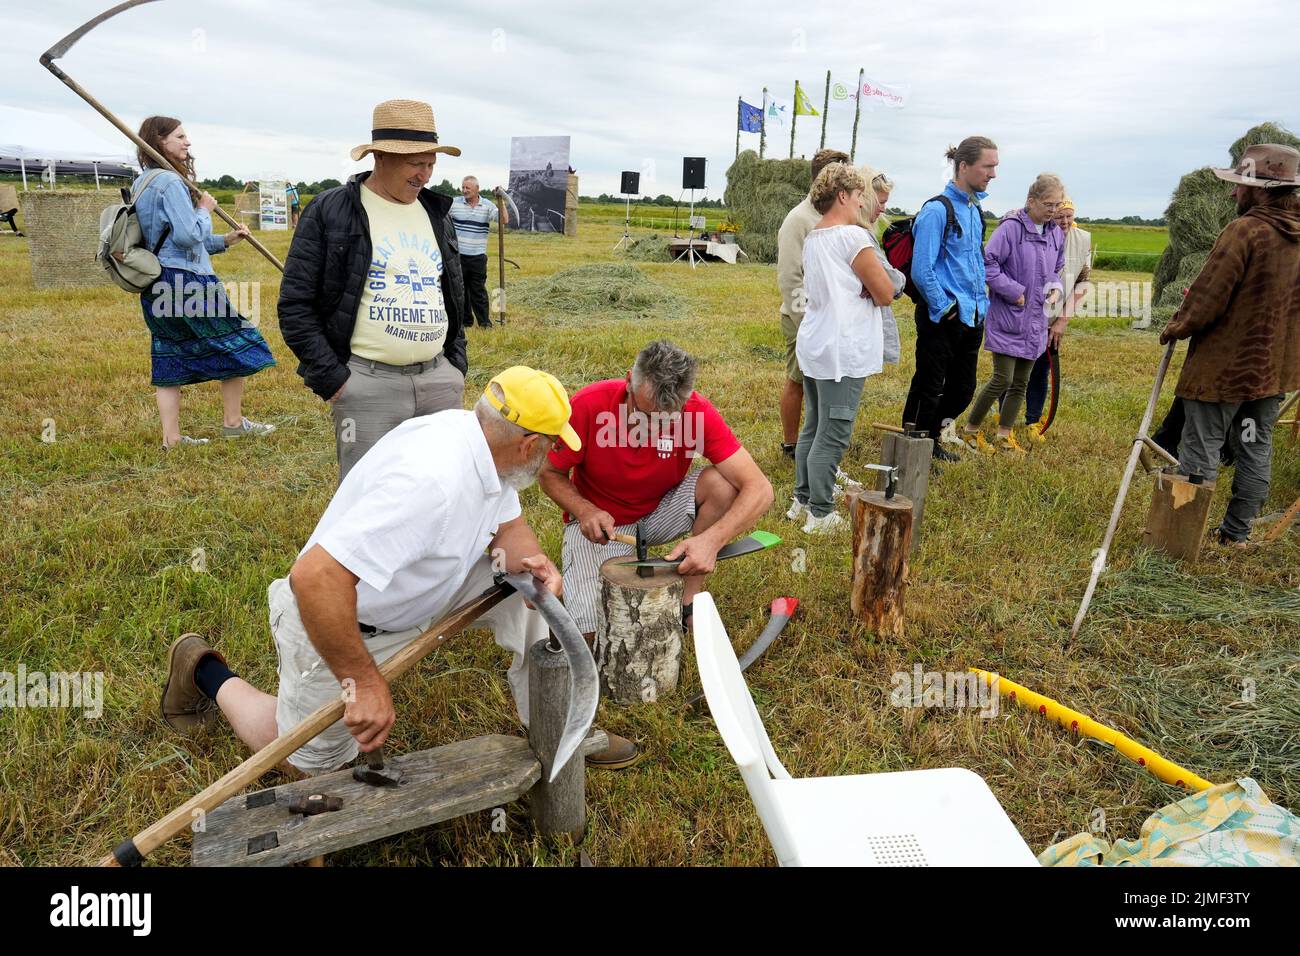 Men prepare scythes during Lithuanian mowing championship to cut down grass using scythes in Rupkalviai, Lithuania  August 6, 2022. REUTERS/Ints Kalnins Stock Photo